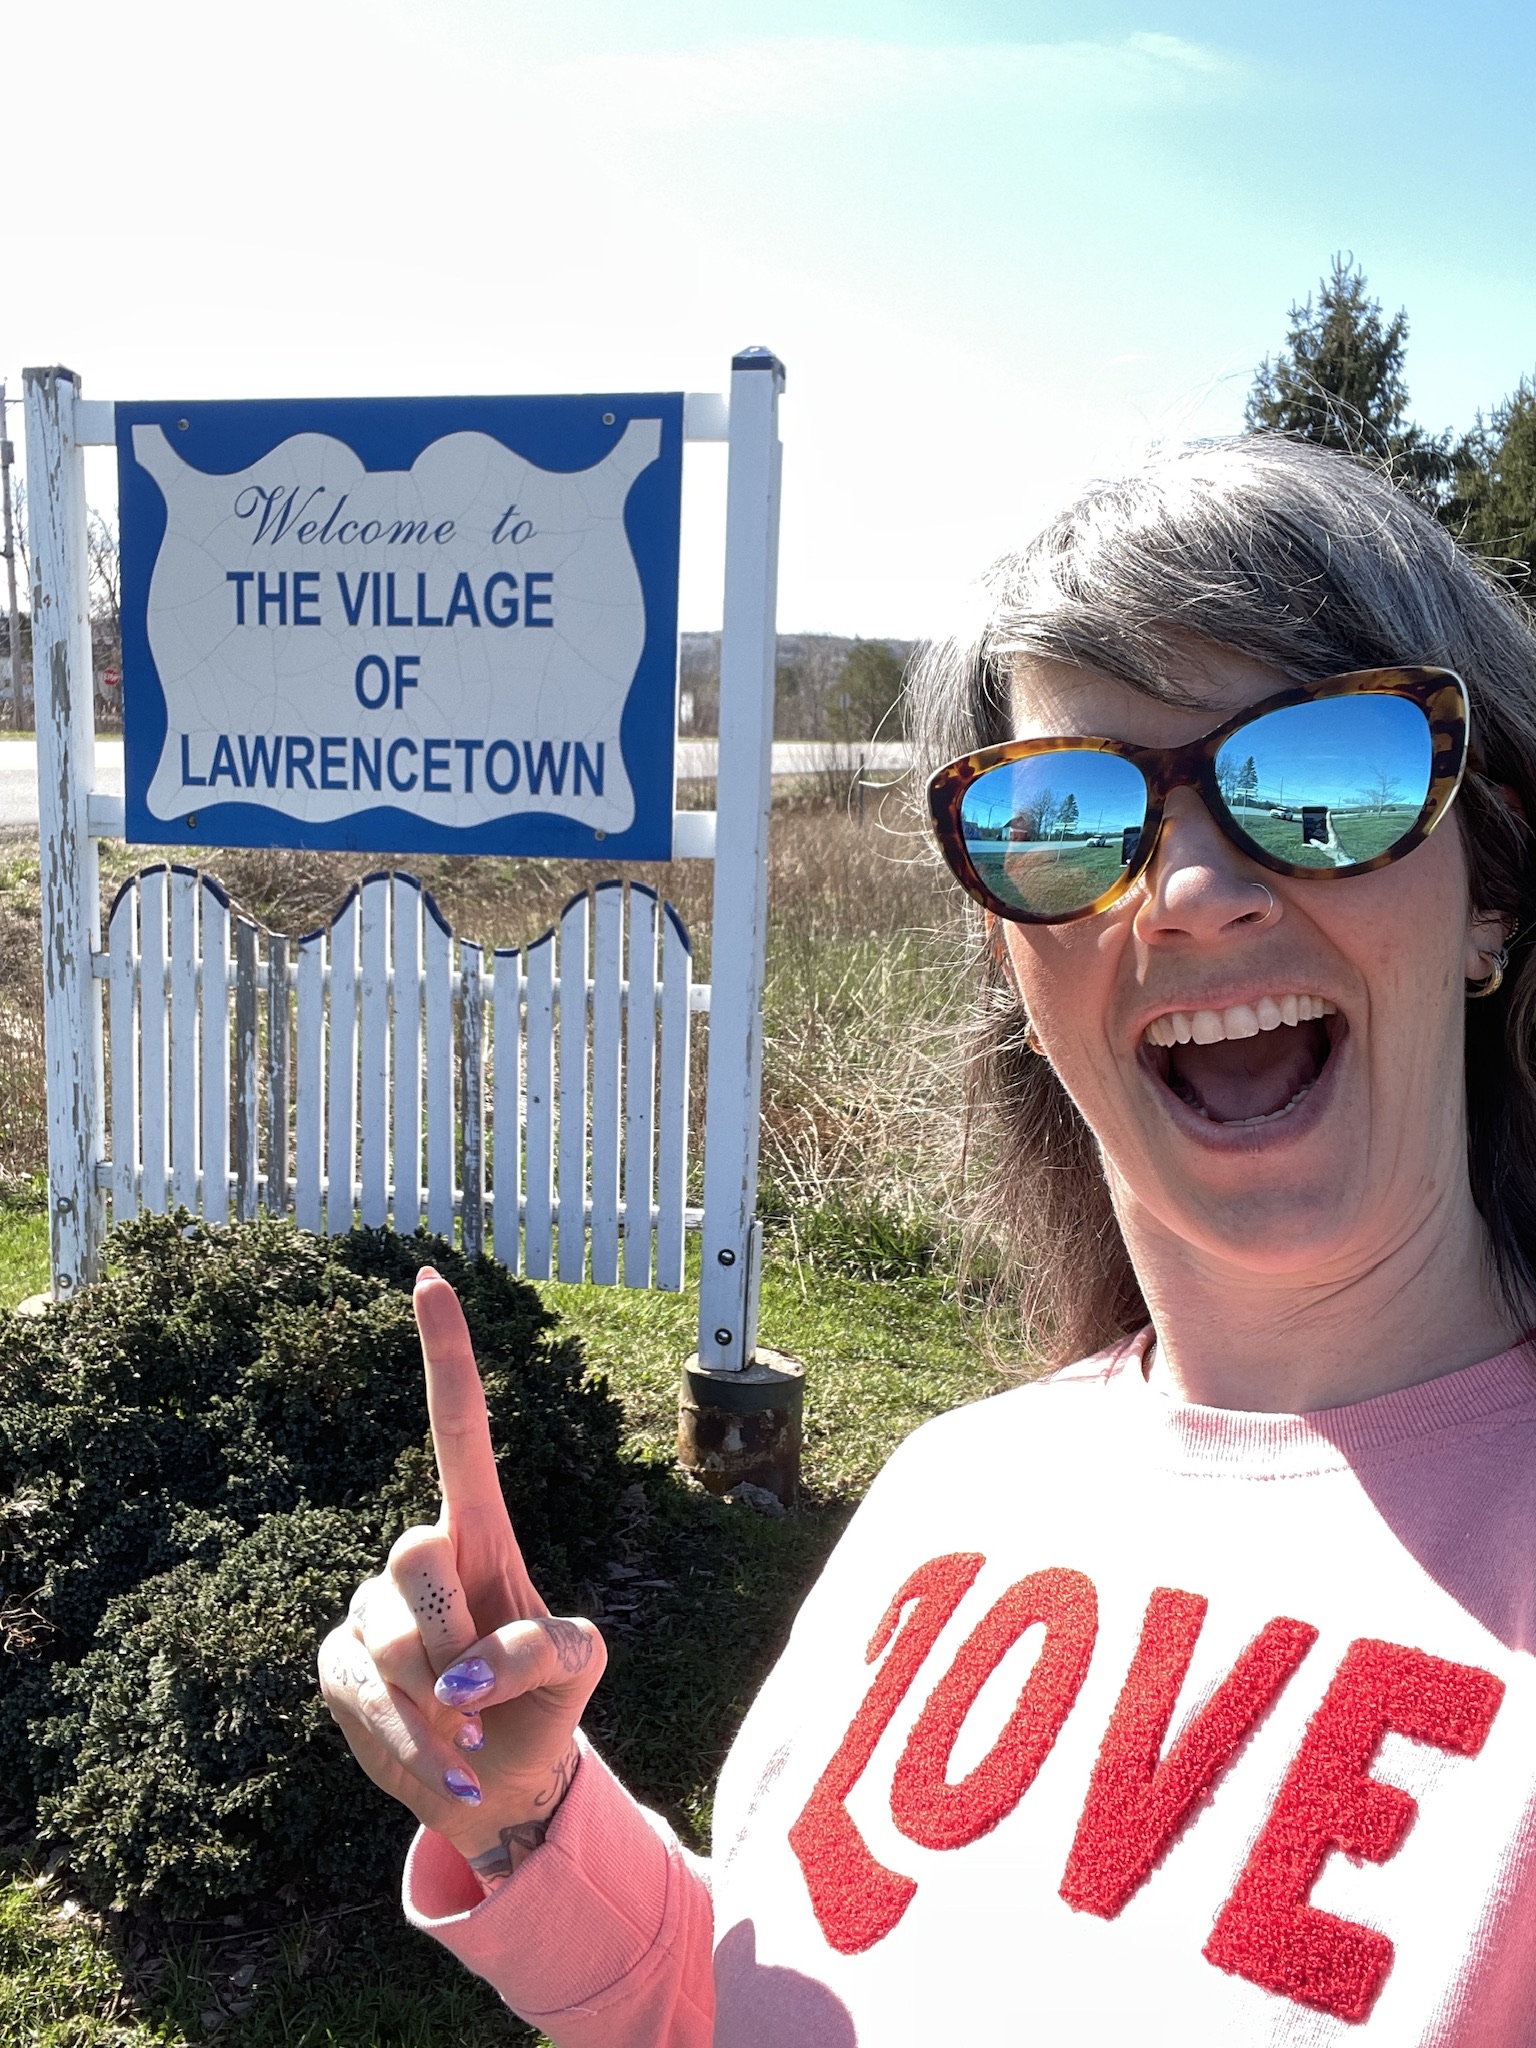 The town sign for the Village of Lawrencetown is in the back ground. A woman wearing a pink sweater with the word "love" in red is pointing to the sign with an open-mouth, very excited smile.